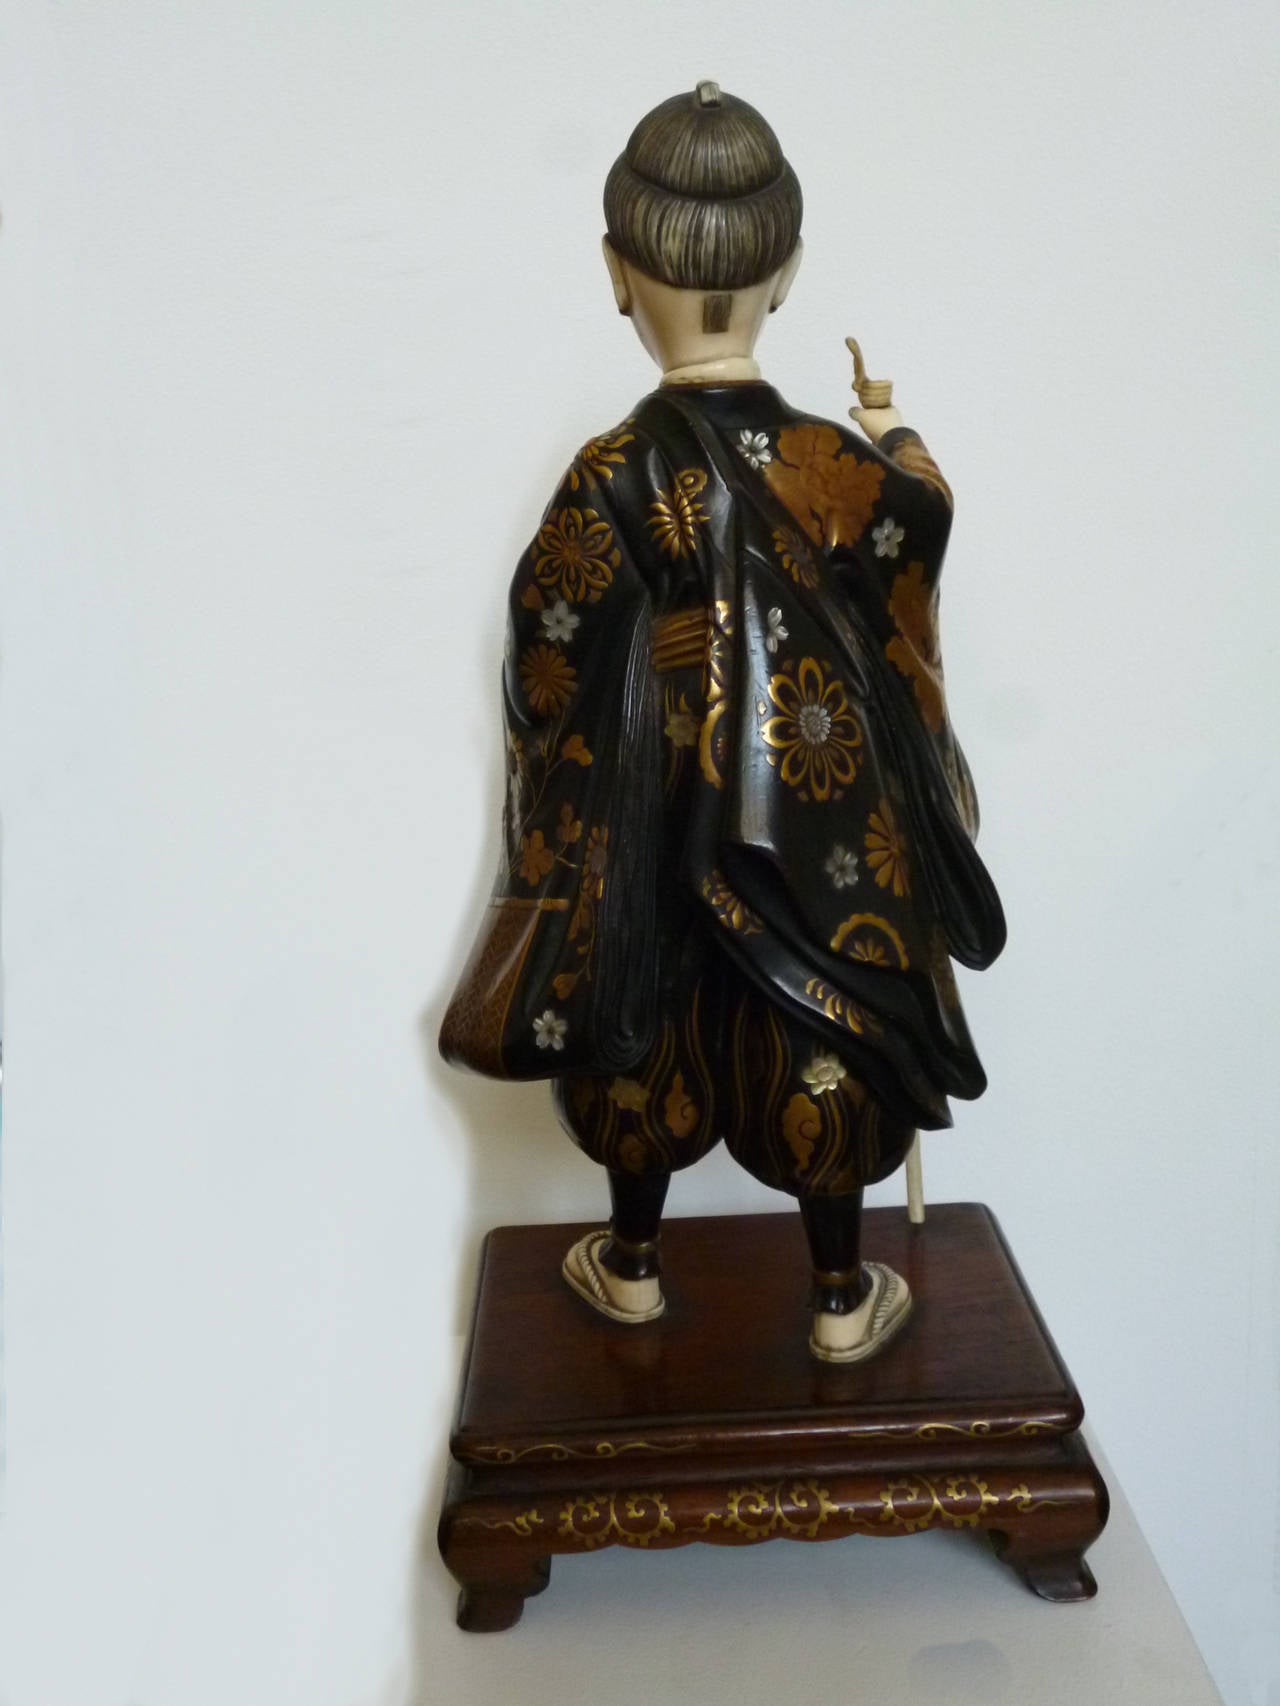 Carved Delightful Standing Woman Figure from Japan